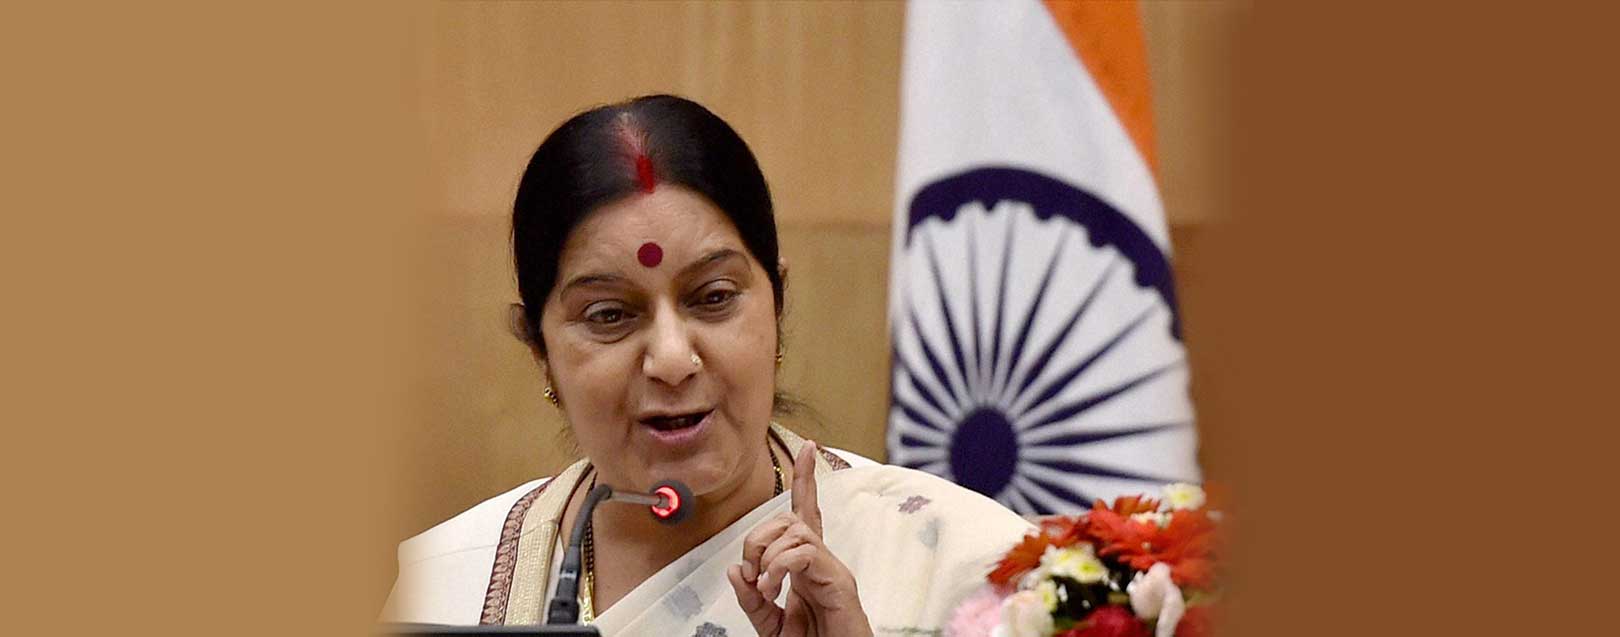 Govt to further relax visa norms to boost tourism: Swaraj